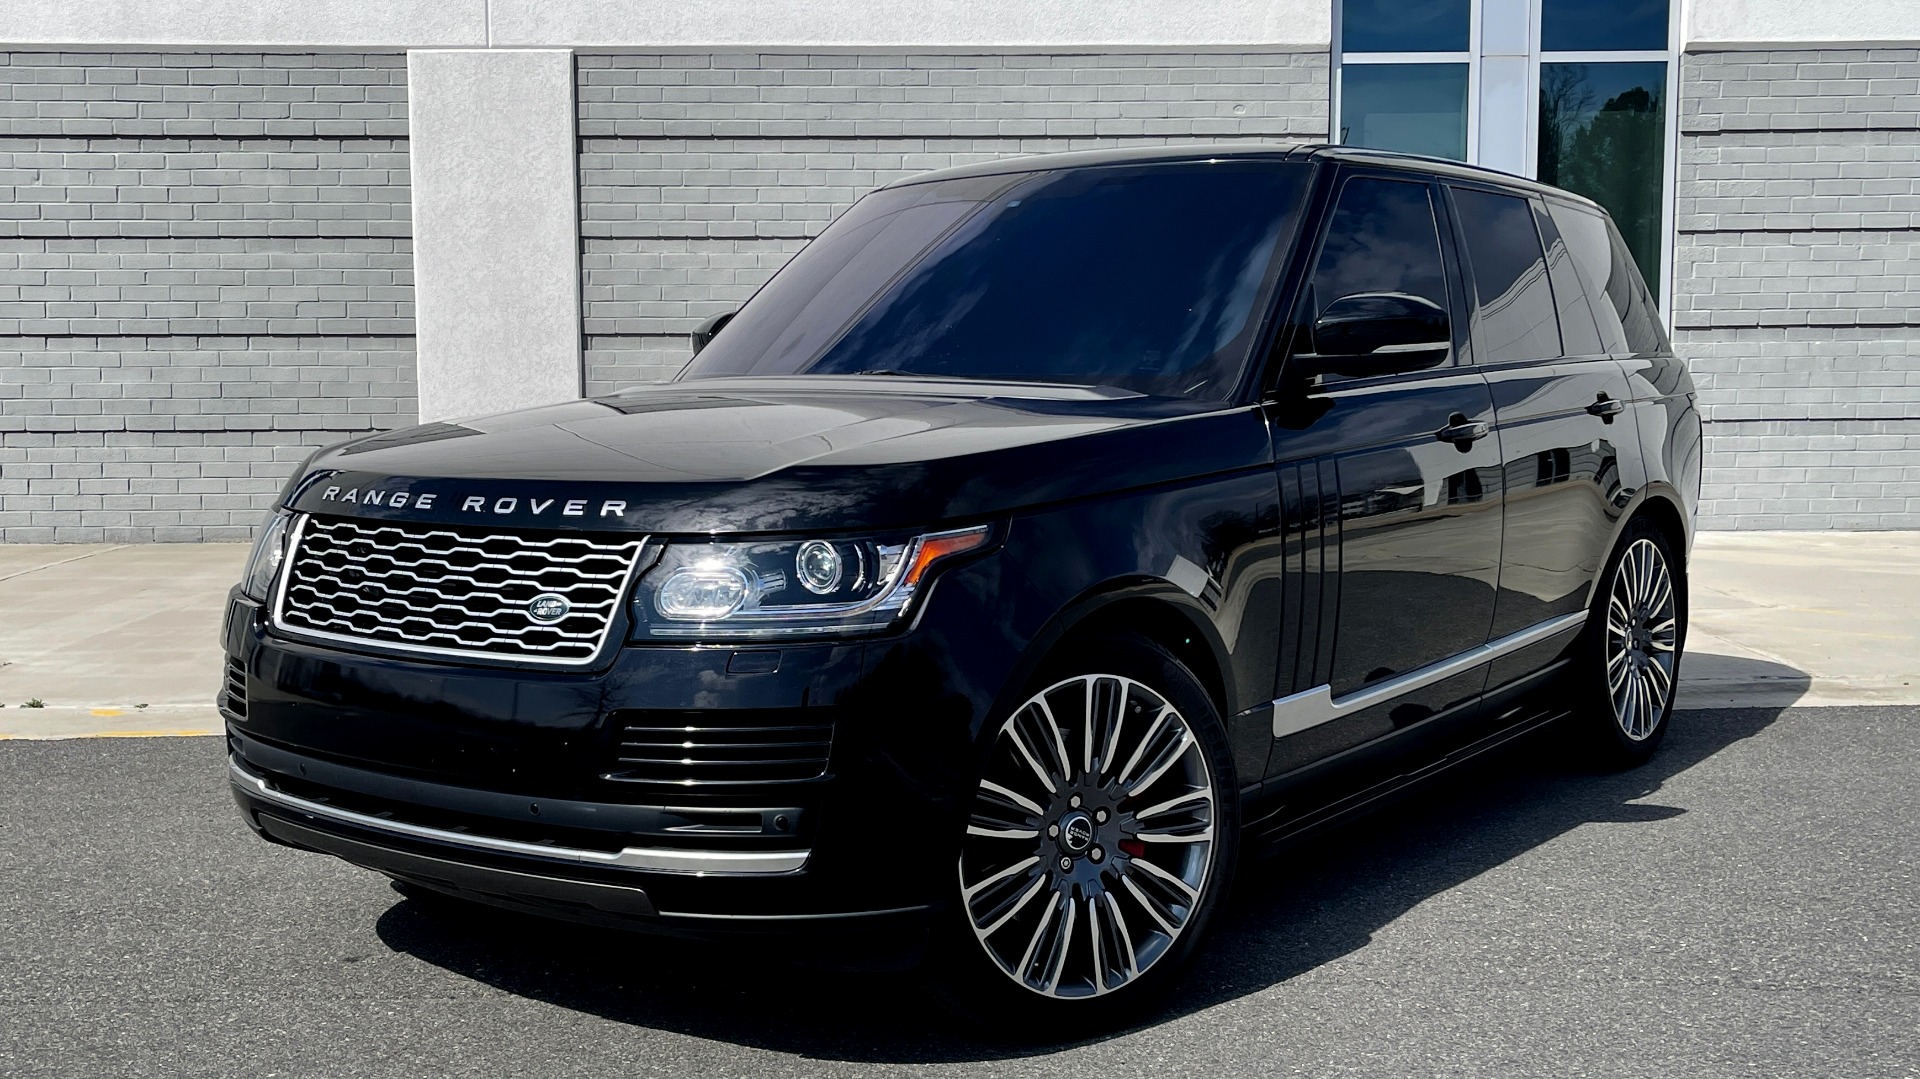 Used 2016 Land Rover Range Rover HSE for sale Sold at Formula Imports in Charlotte NC 28227 1